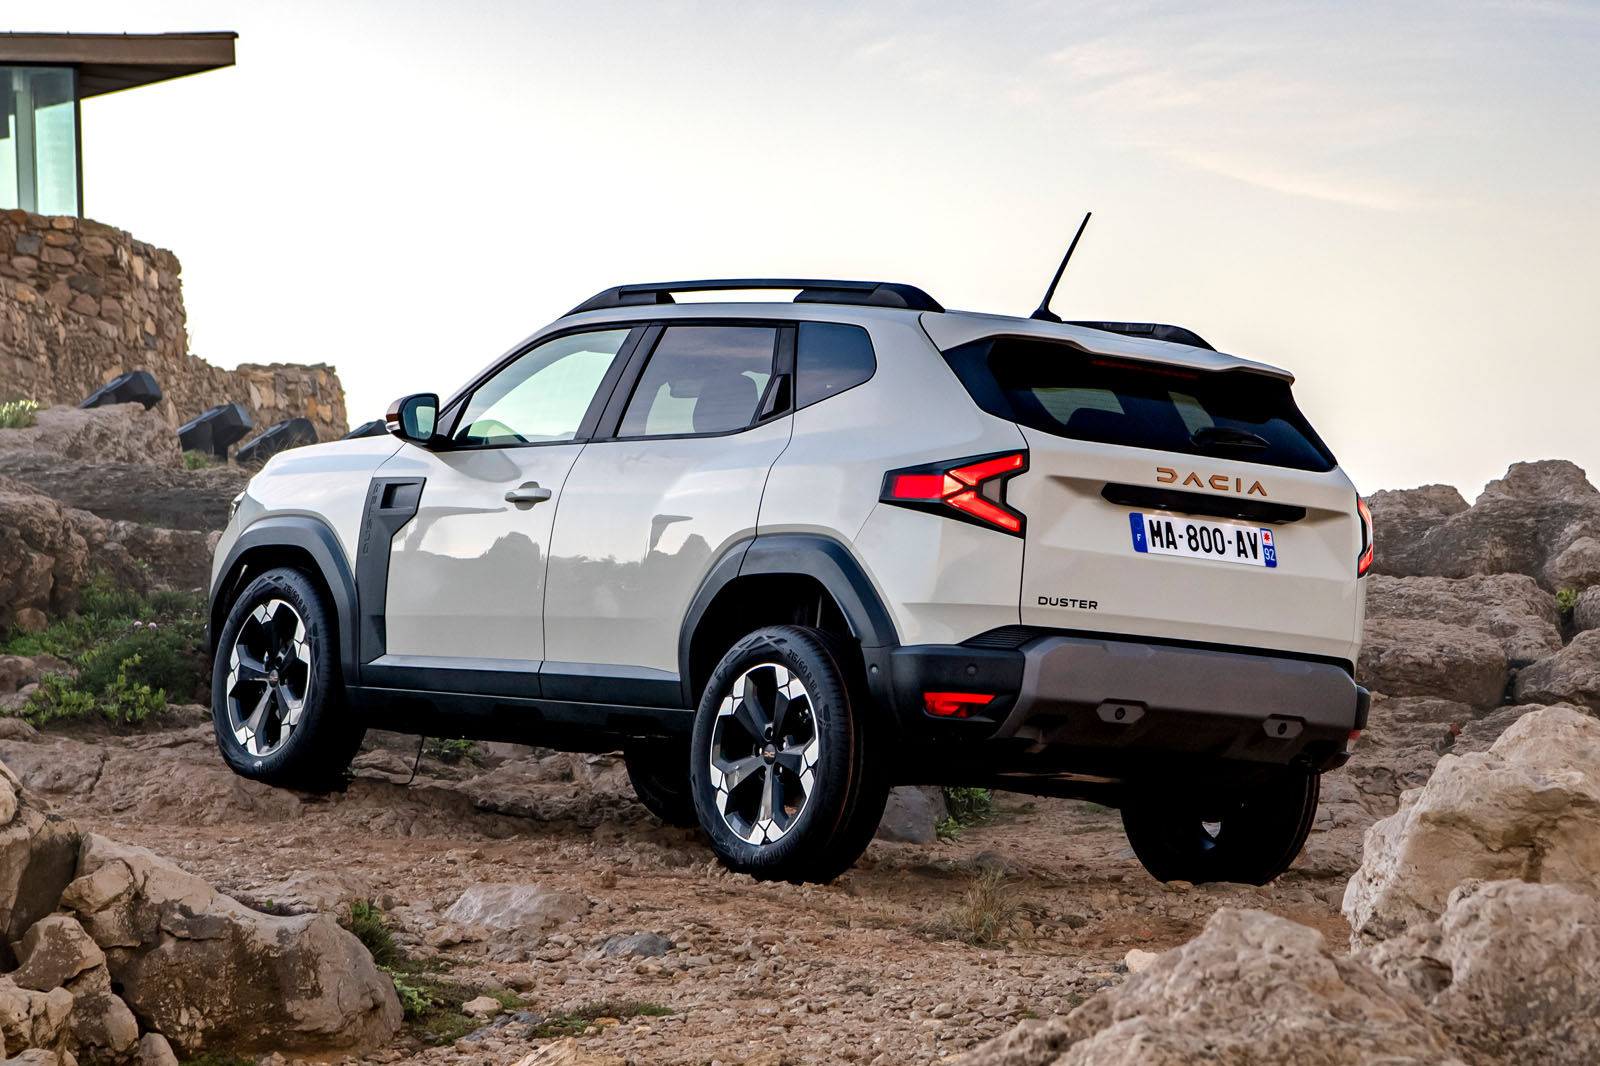 It's the brand-new Dacia Duster!